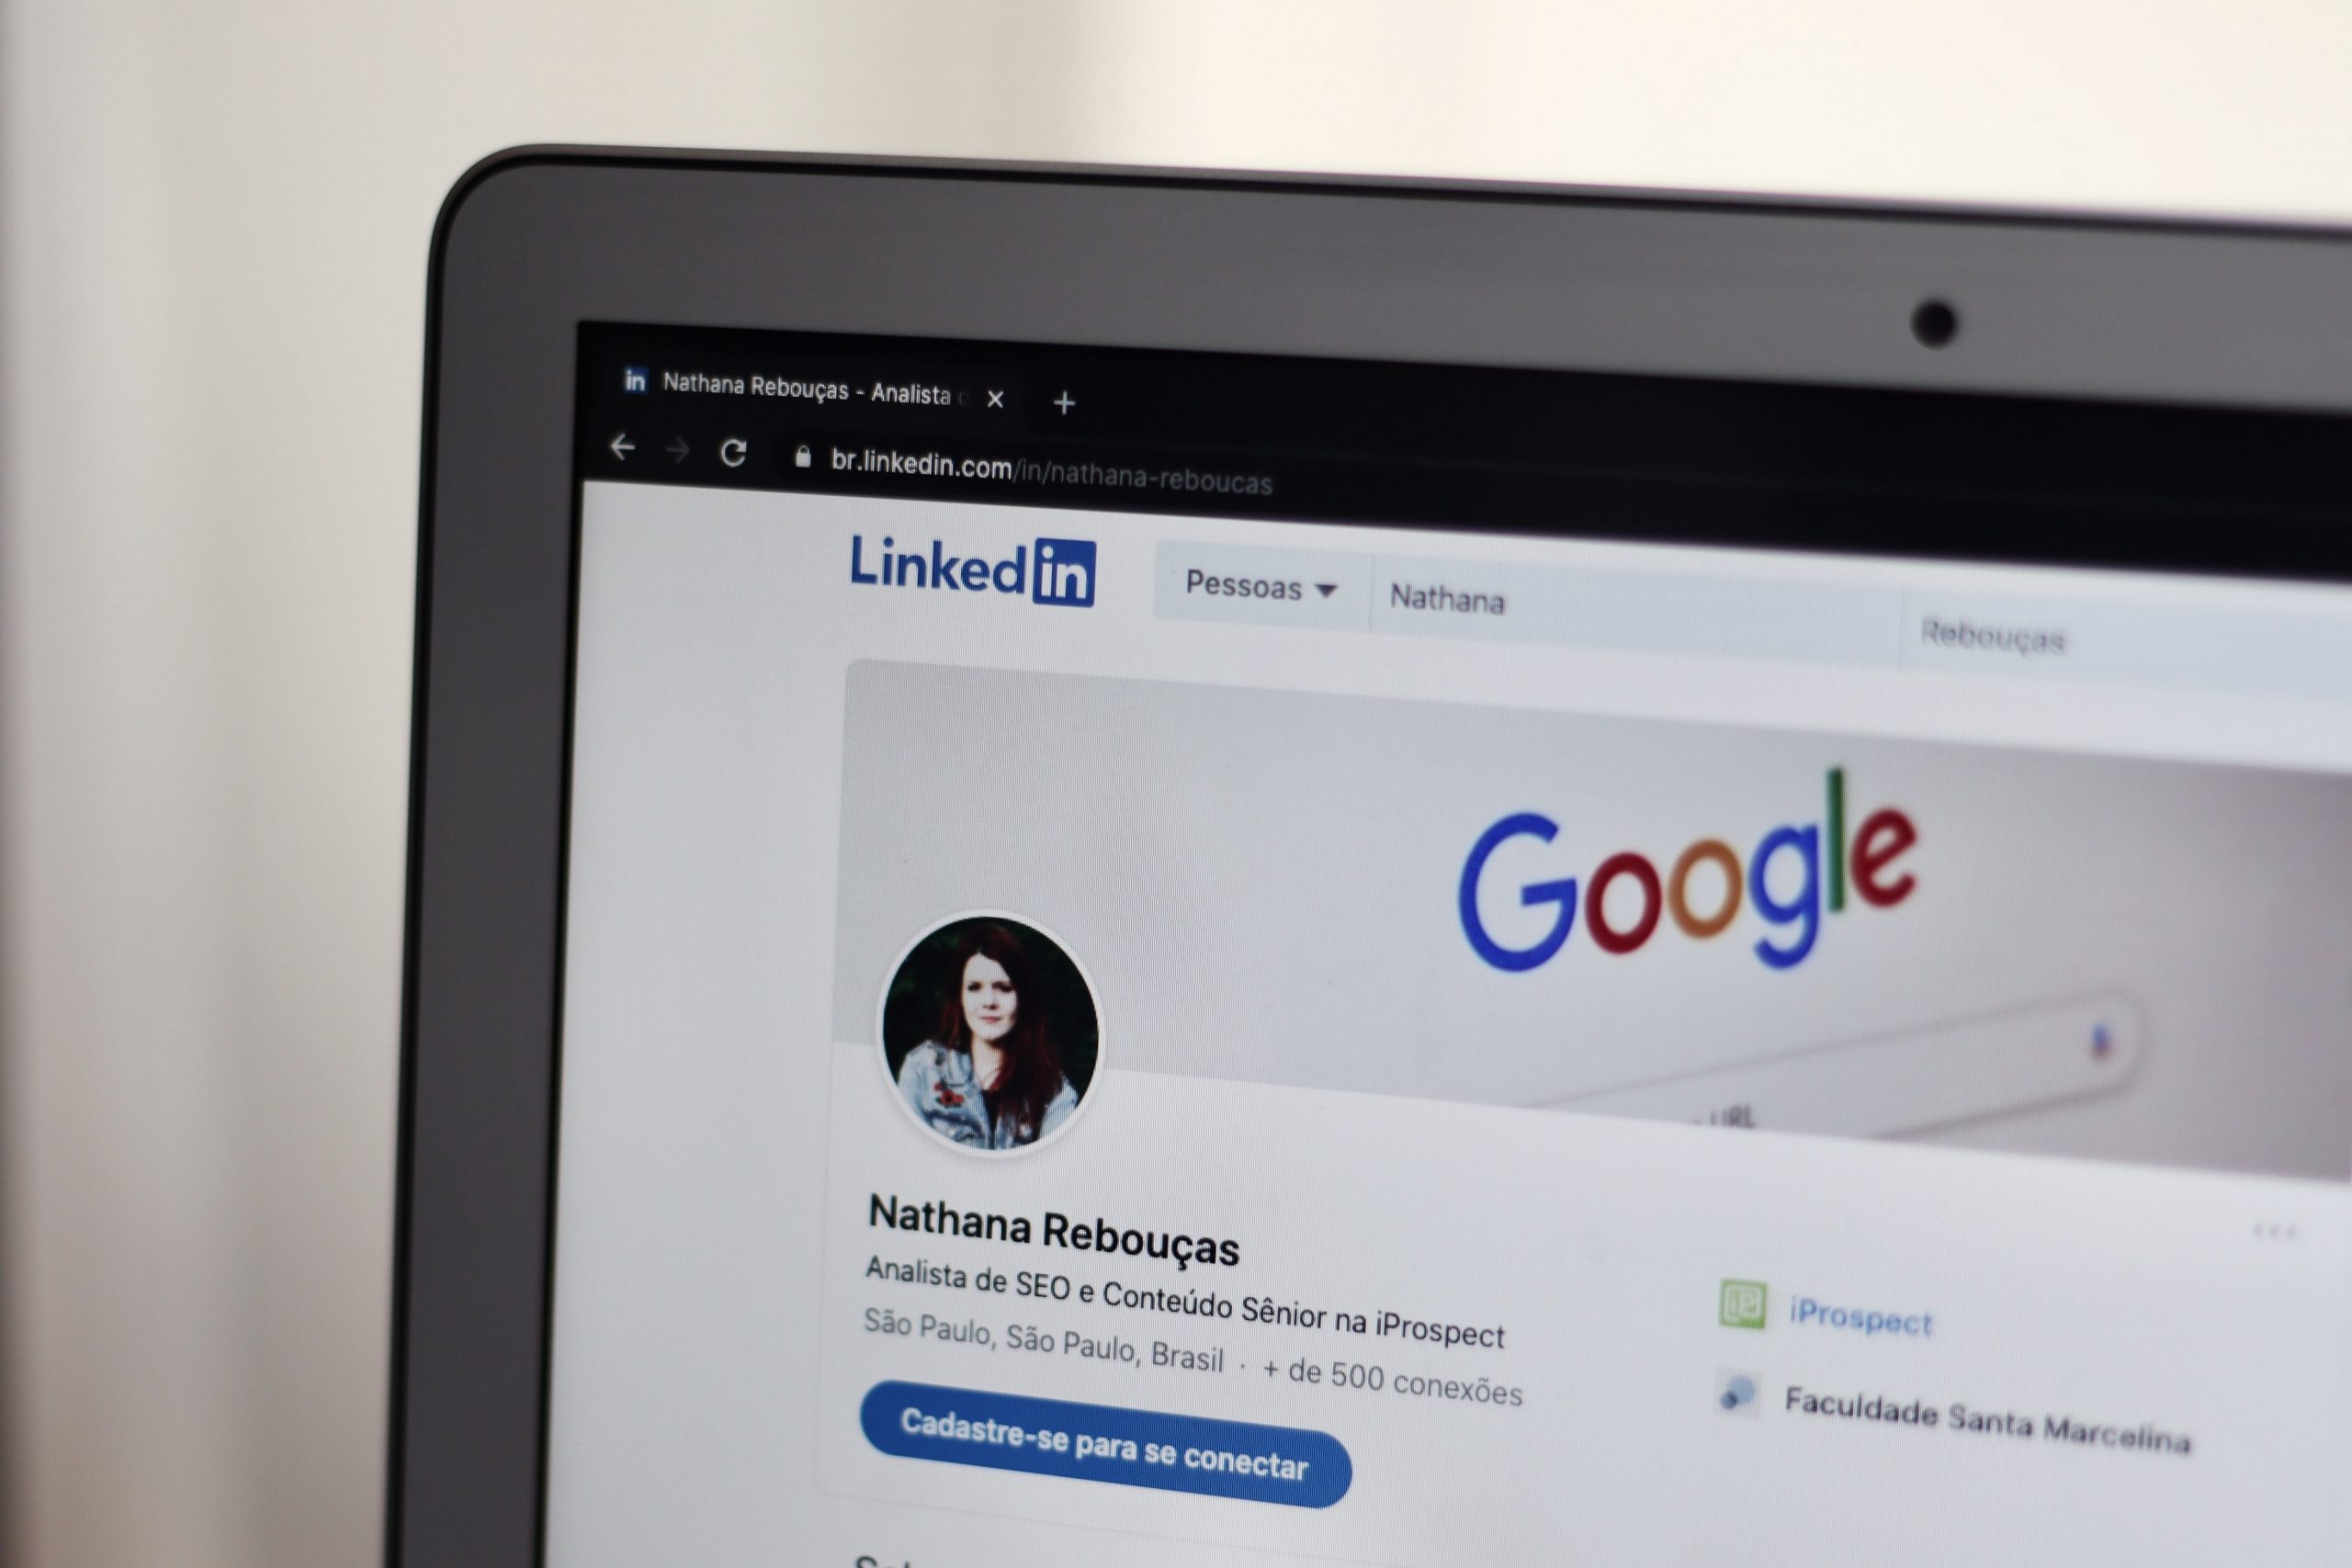 How to find a job on LinkedIn?